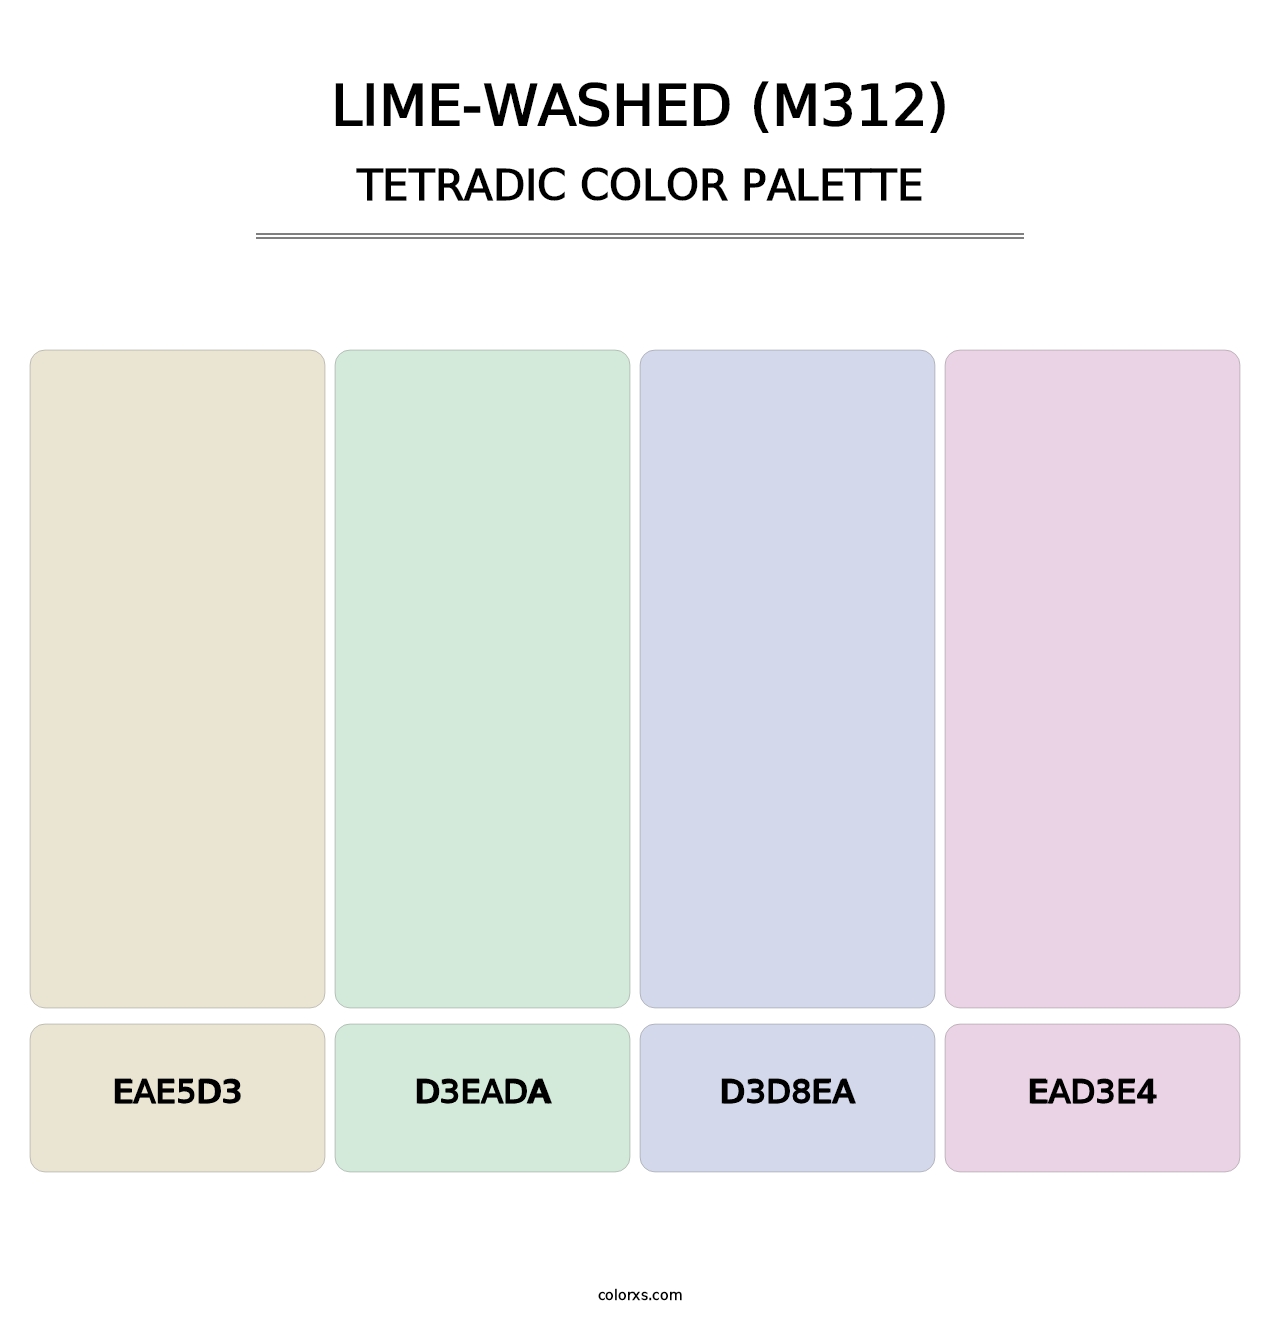 Lime-Washed (M312) - Tetradic Color Palette